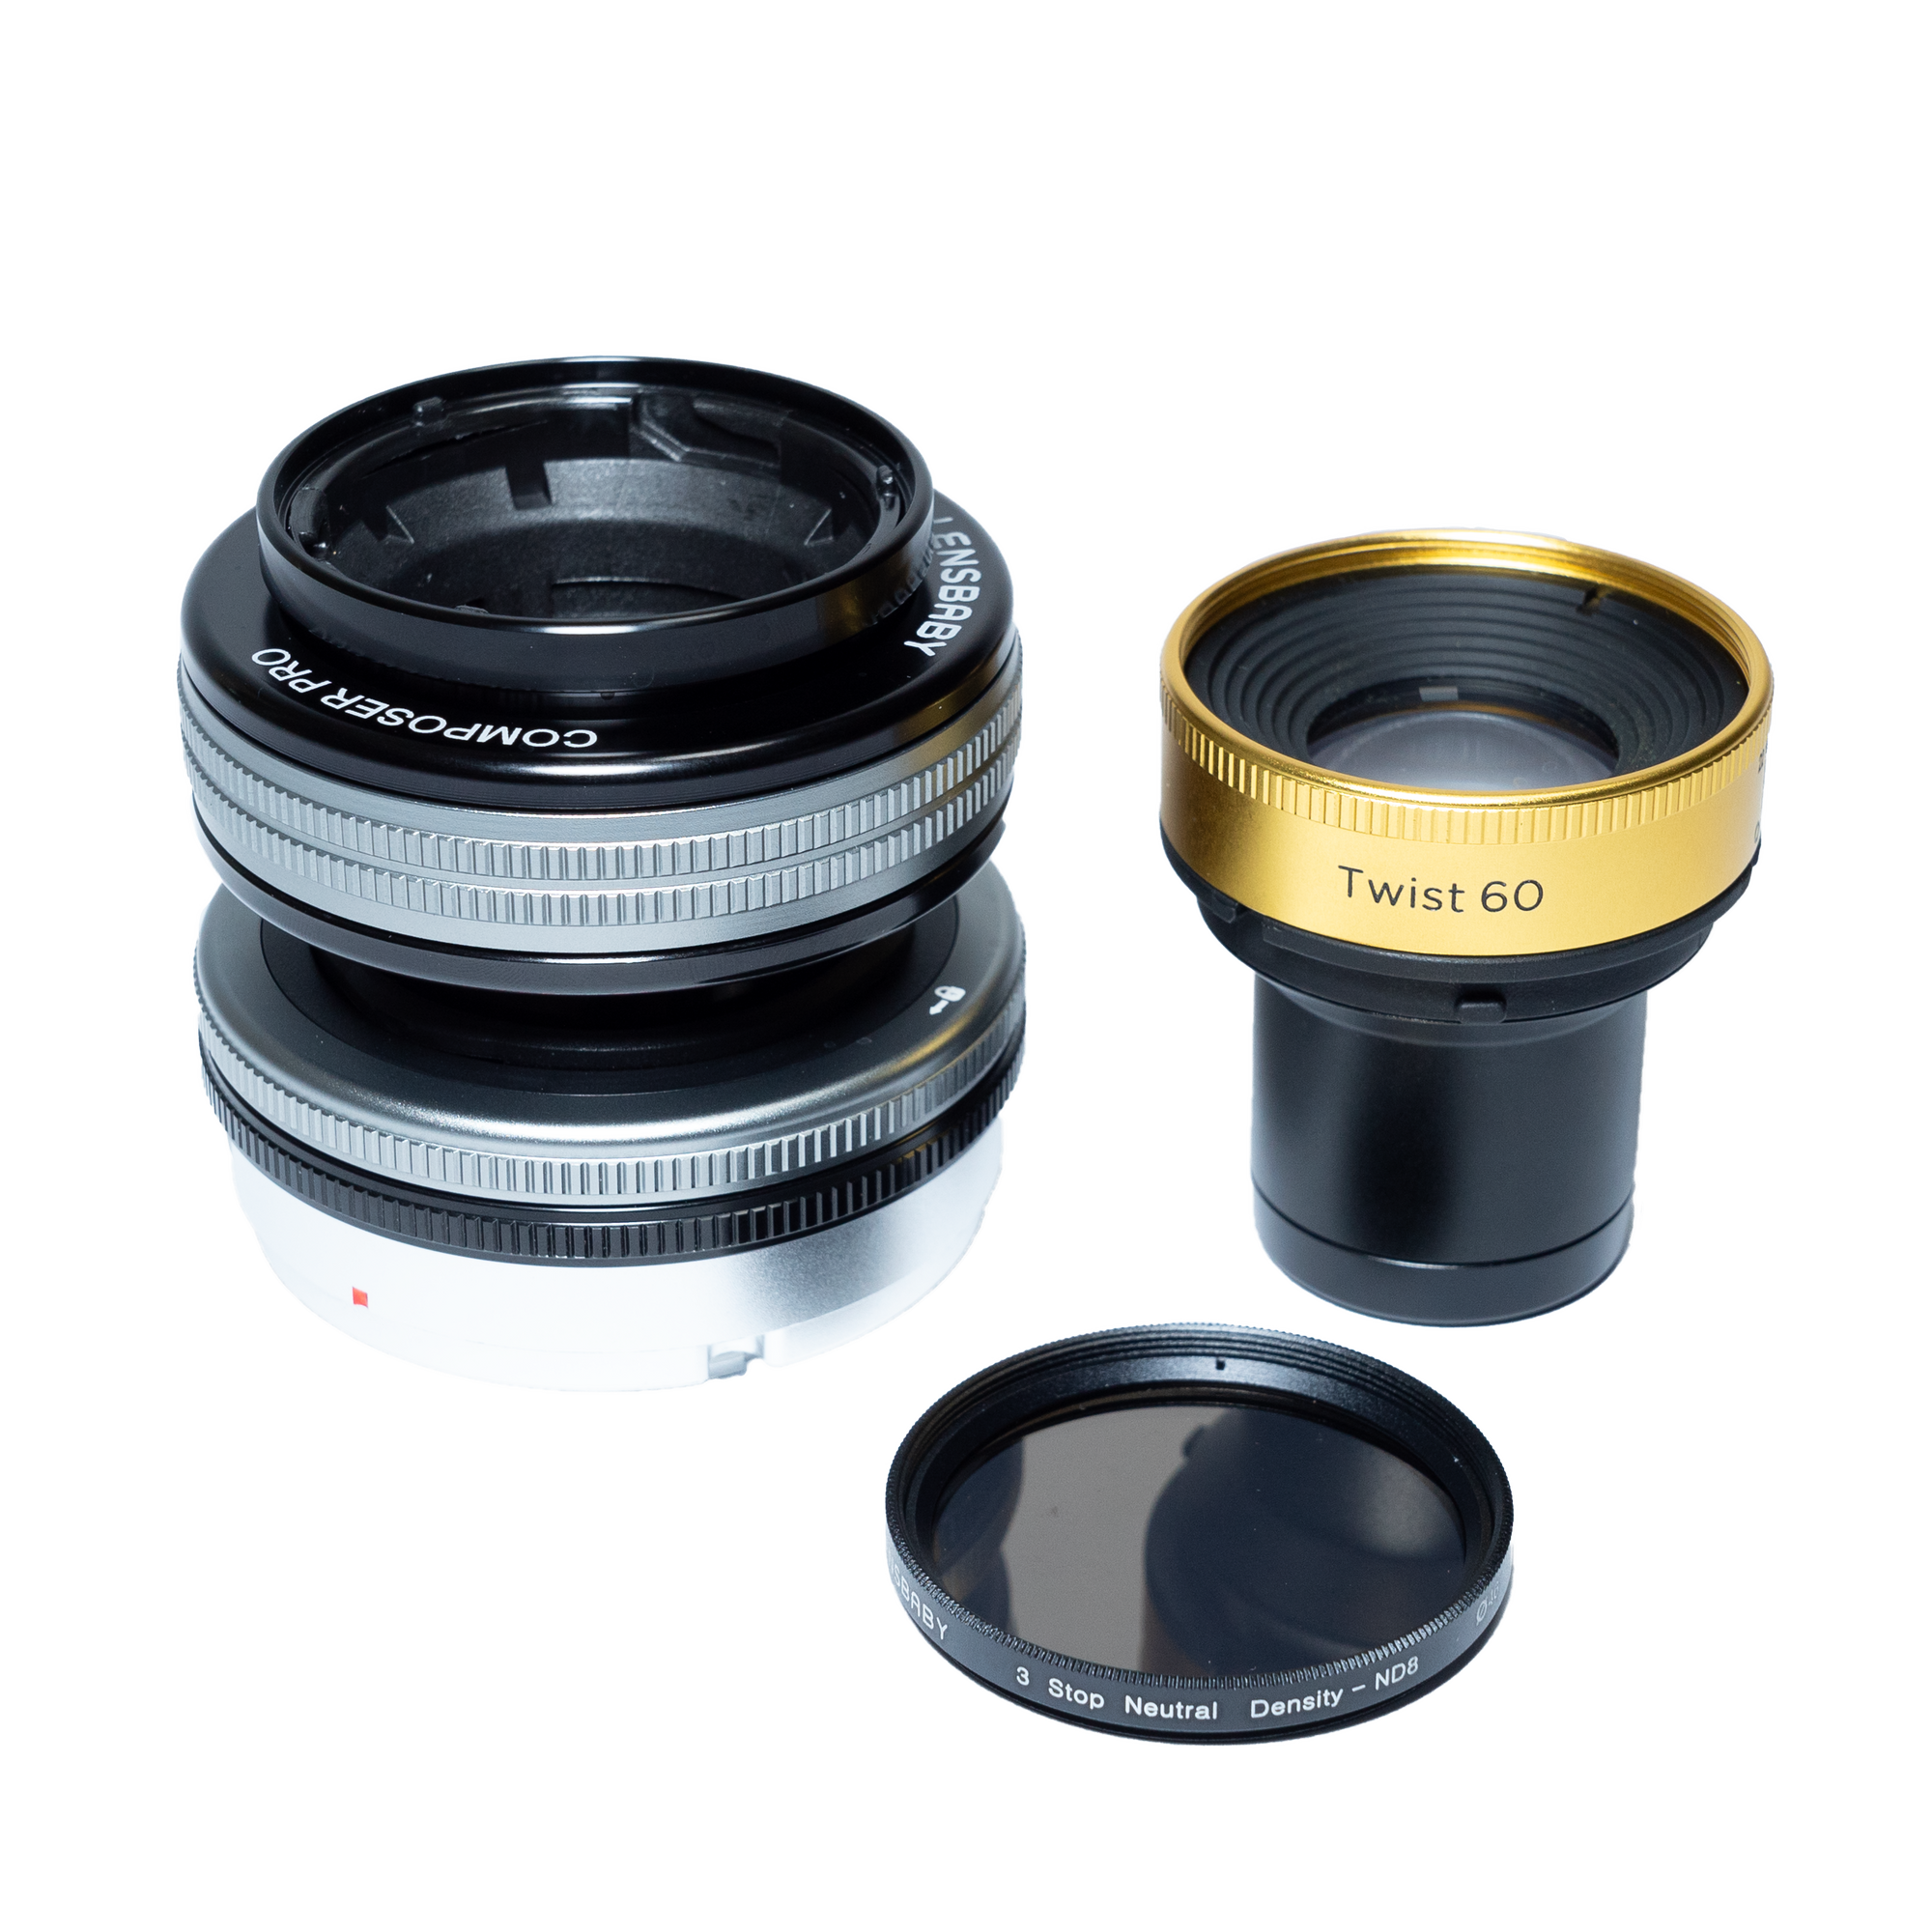 Composer Pro II + Twist 60 & ND Filter - Lensbaby Creative Effect Camera Lenses